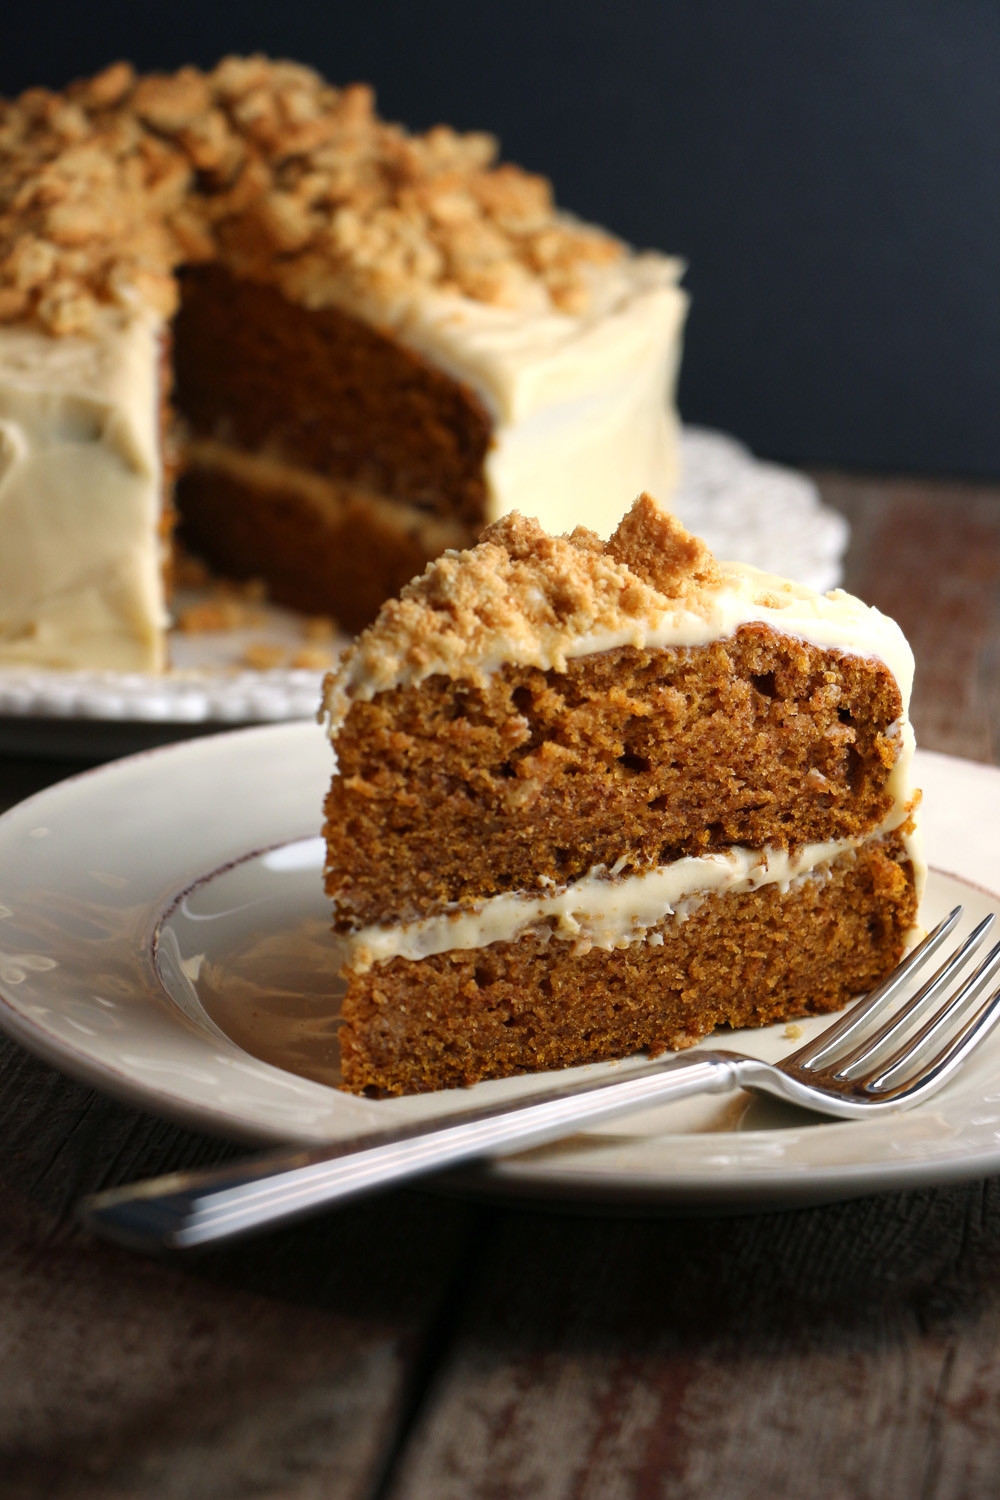 Spice Cake Recipe With Cream Cheese Frosting
 Spiced Pumpkin Cake with Molasses Cream Cheese Frosting